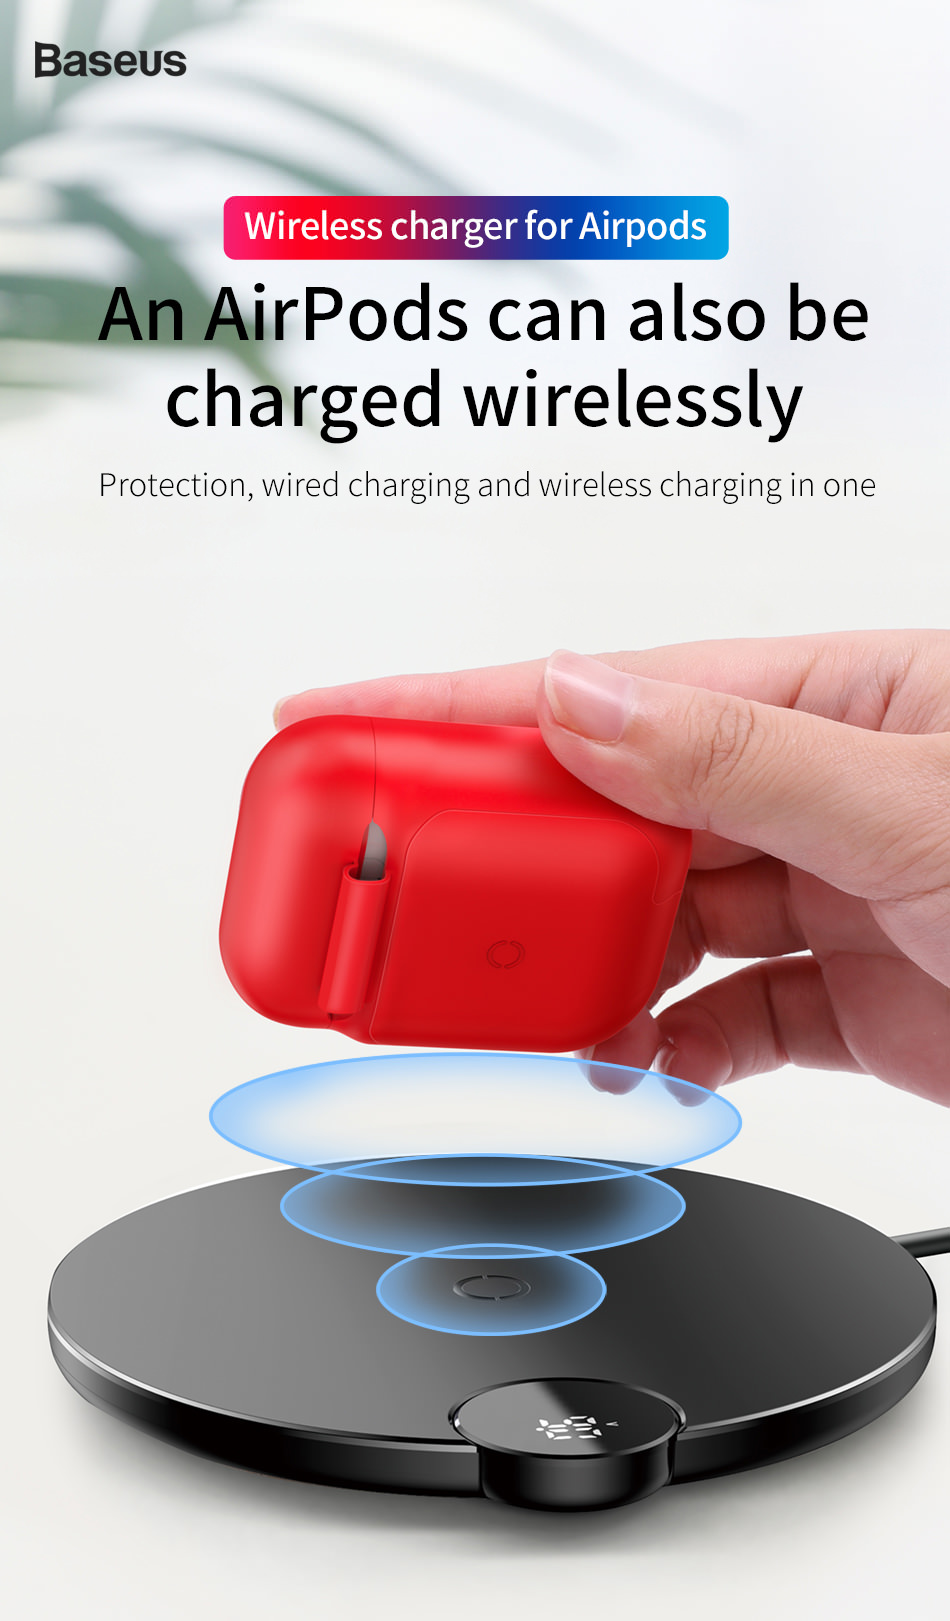 baseus wireless charging case airpods